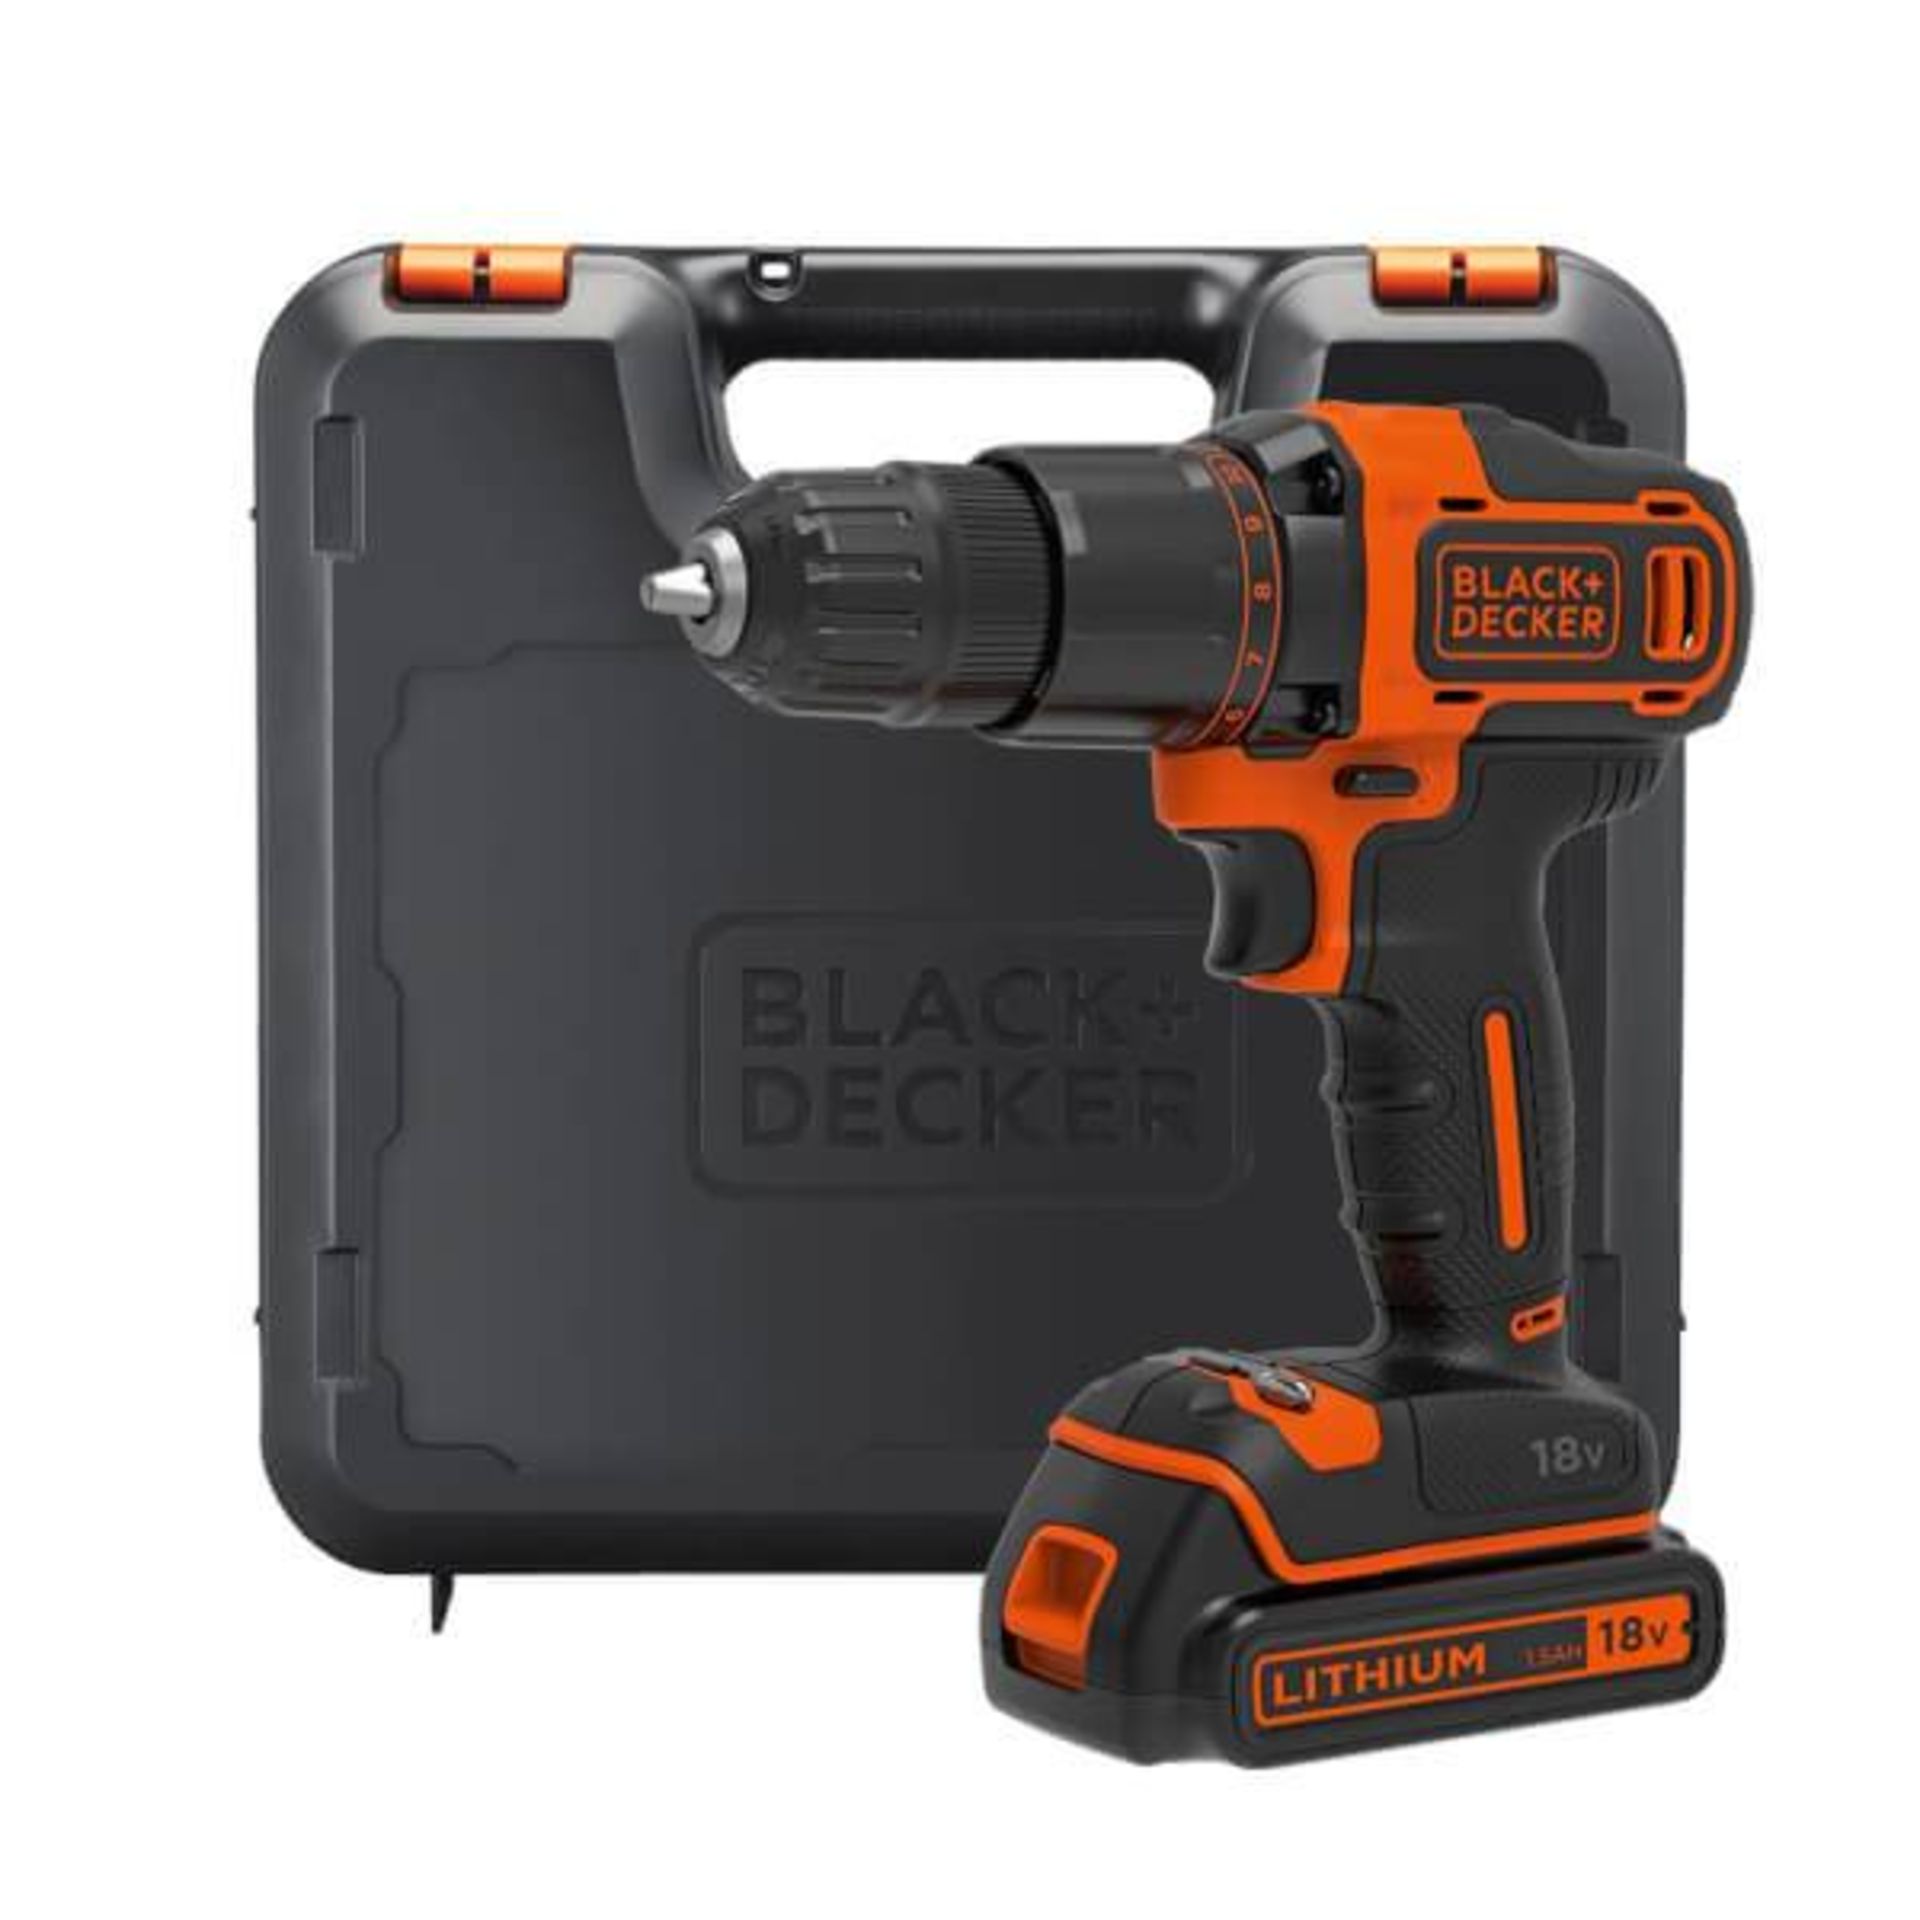 (R15B) 2x Black & Decker 18V 2 Gear Hammer Drill With Carry Case. Both Units Have Battery & Charger